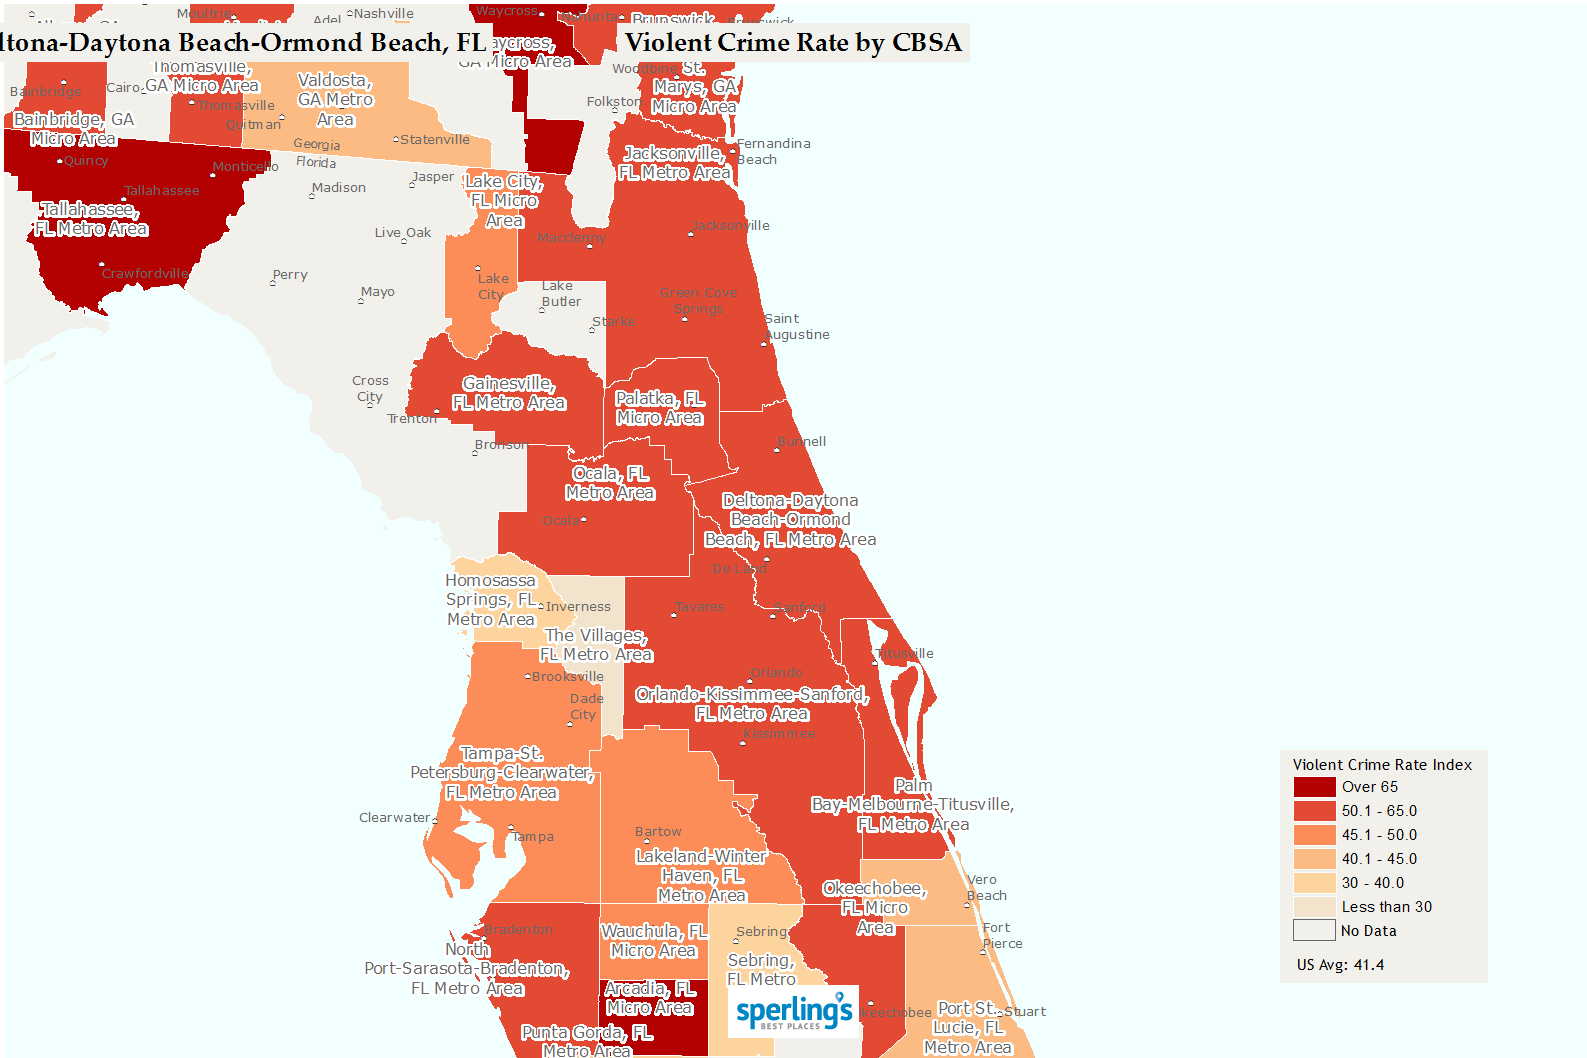 Best Places To Live | Compare Cost Of Living, Crime, Cities, Schools - New Smyrna Beach Florida Map